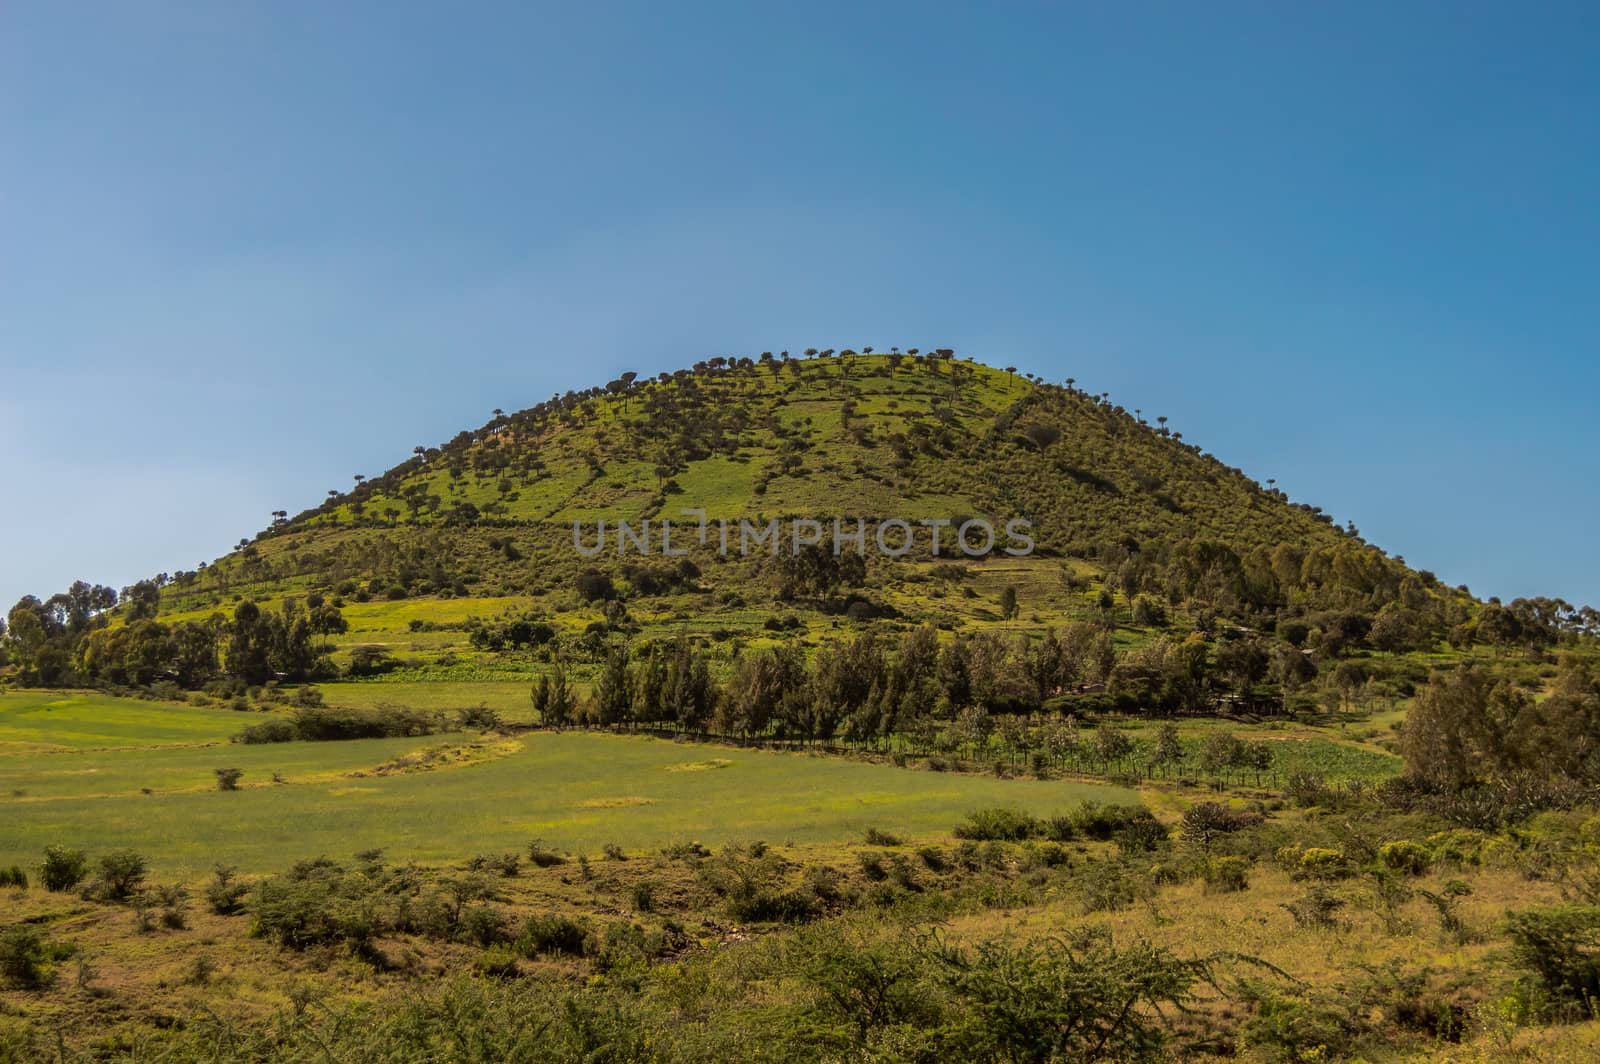 Wooded hill in the shape of a half sphere in central Kenya